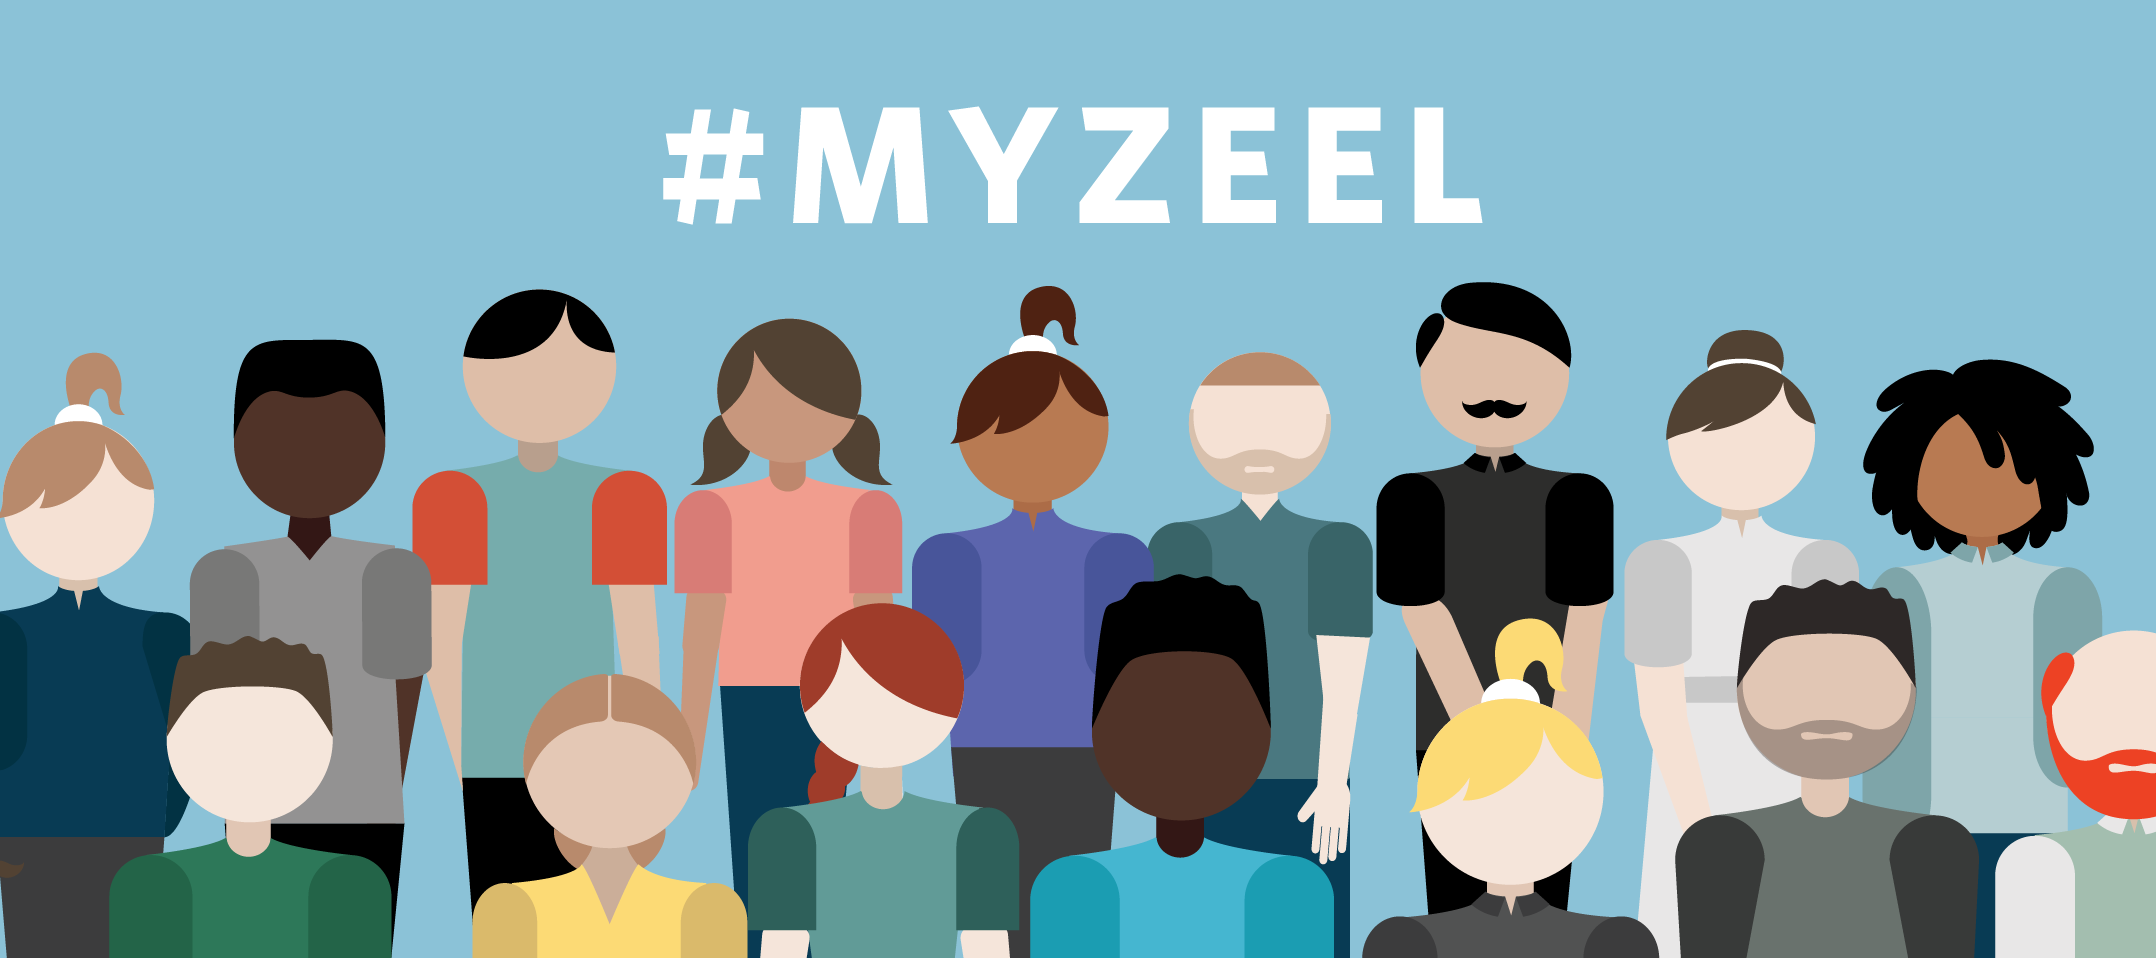 Diverse group of cartoon illustrations stand beneath the hashtag #MyZeel